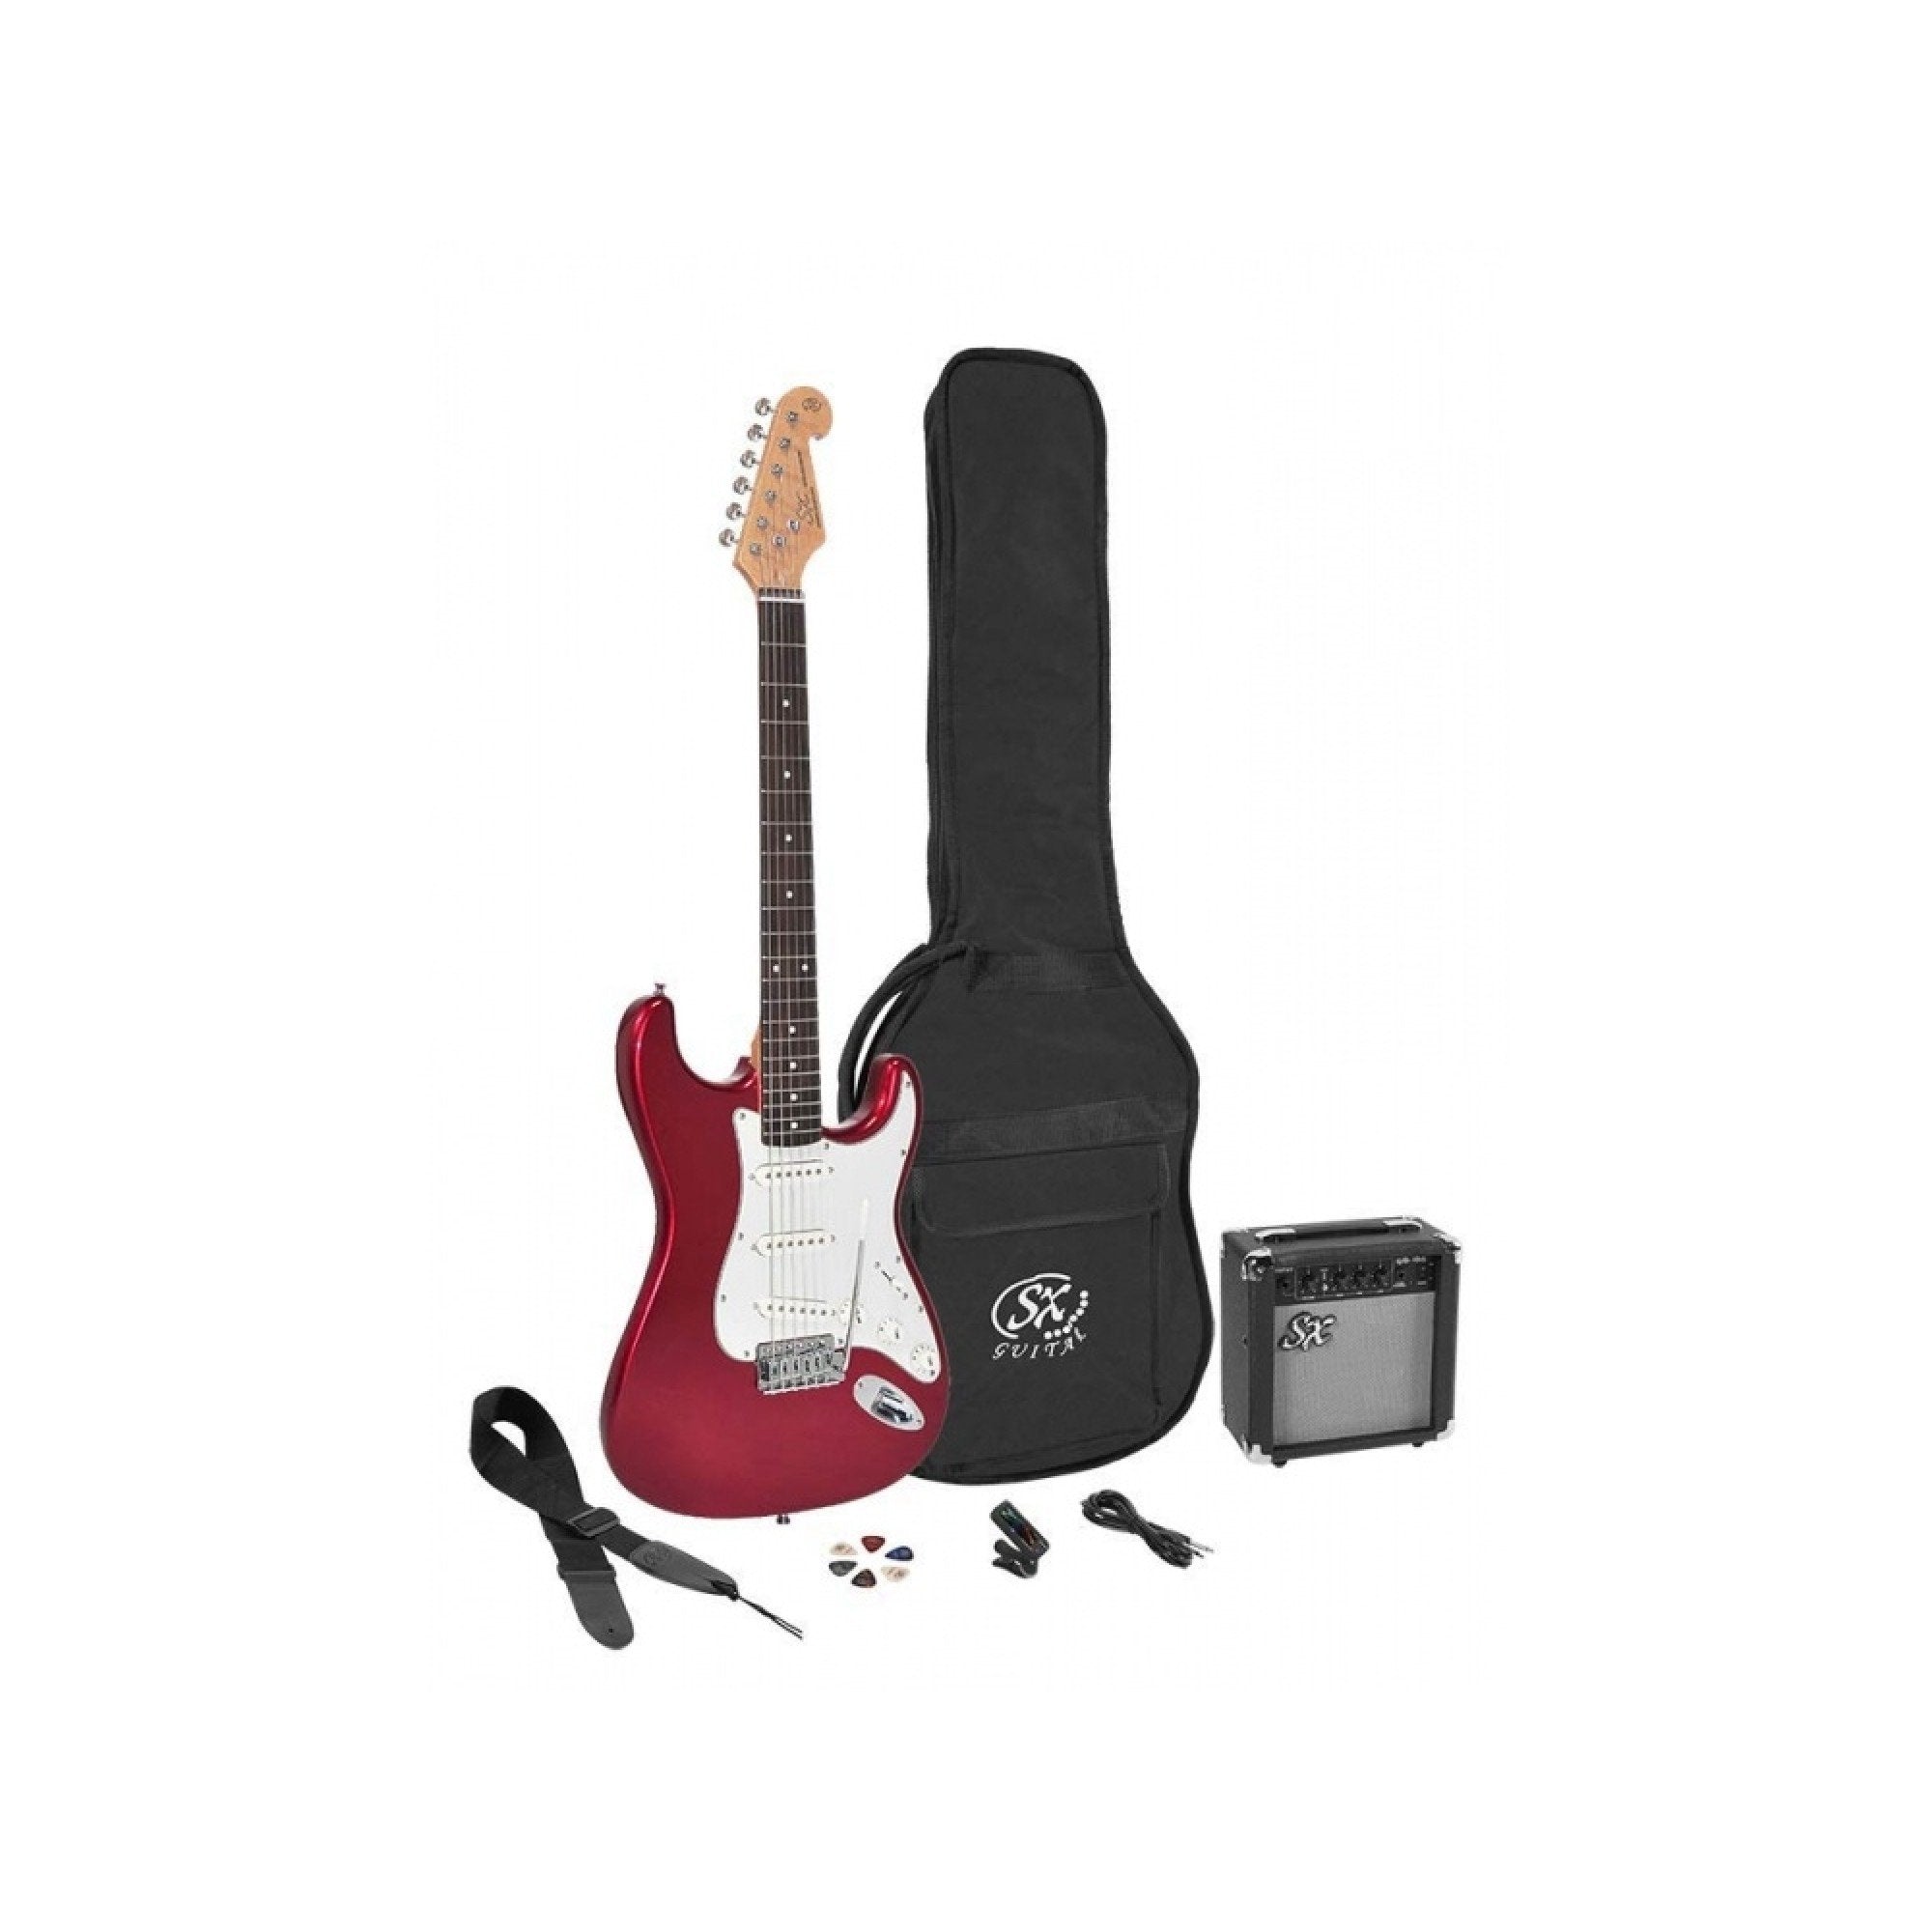 Essex SE1SK Stratocaster Style Electric Guitar Pack - Candy Apple Red